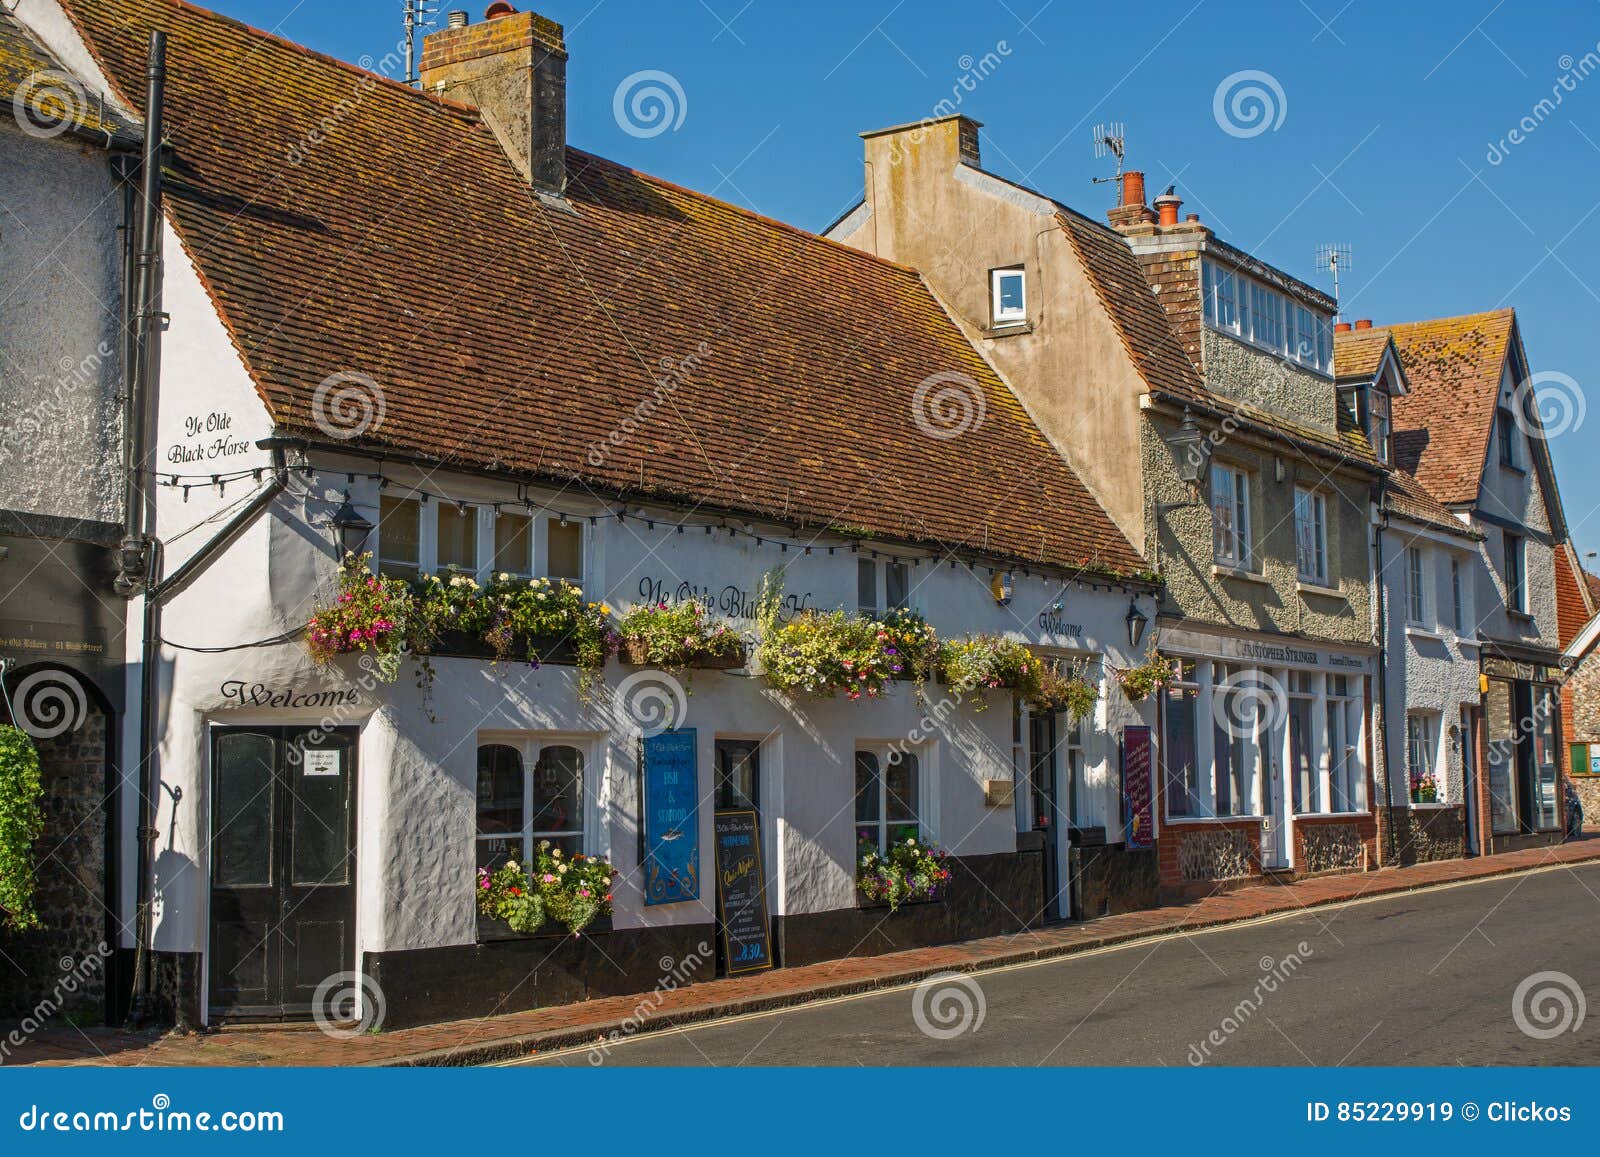 High Street At Rottingdean Sussex England Editorial Stock Image